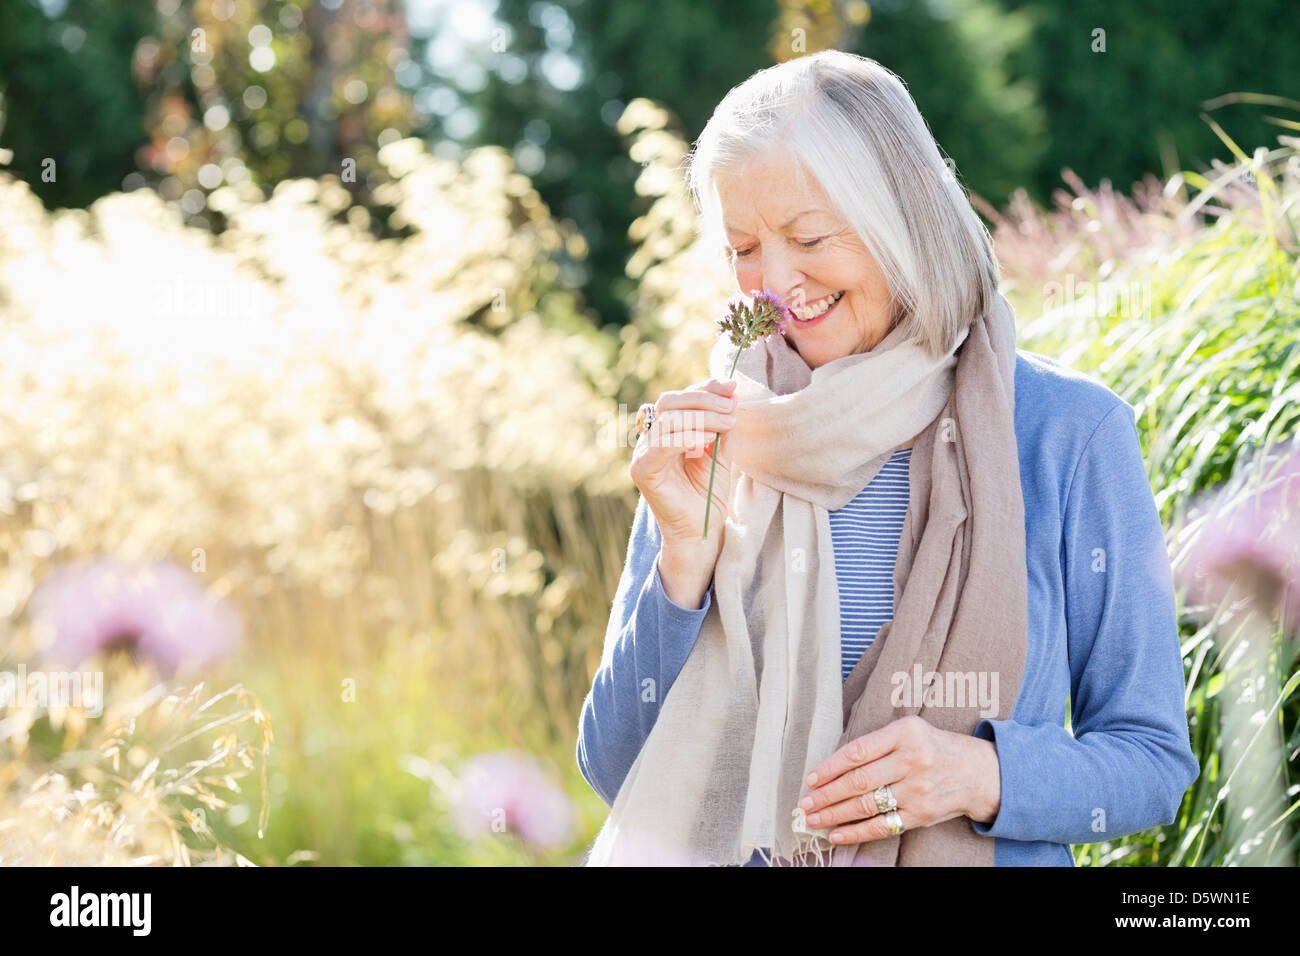 Older woman smelling flowers outdoors Stock Photo